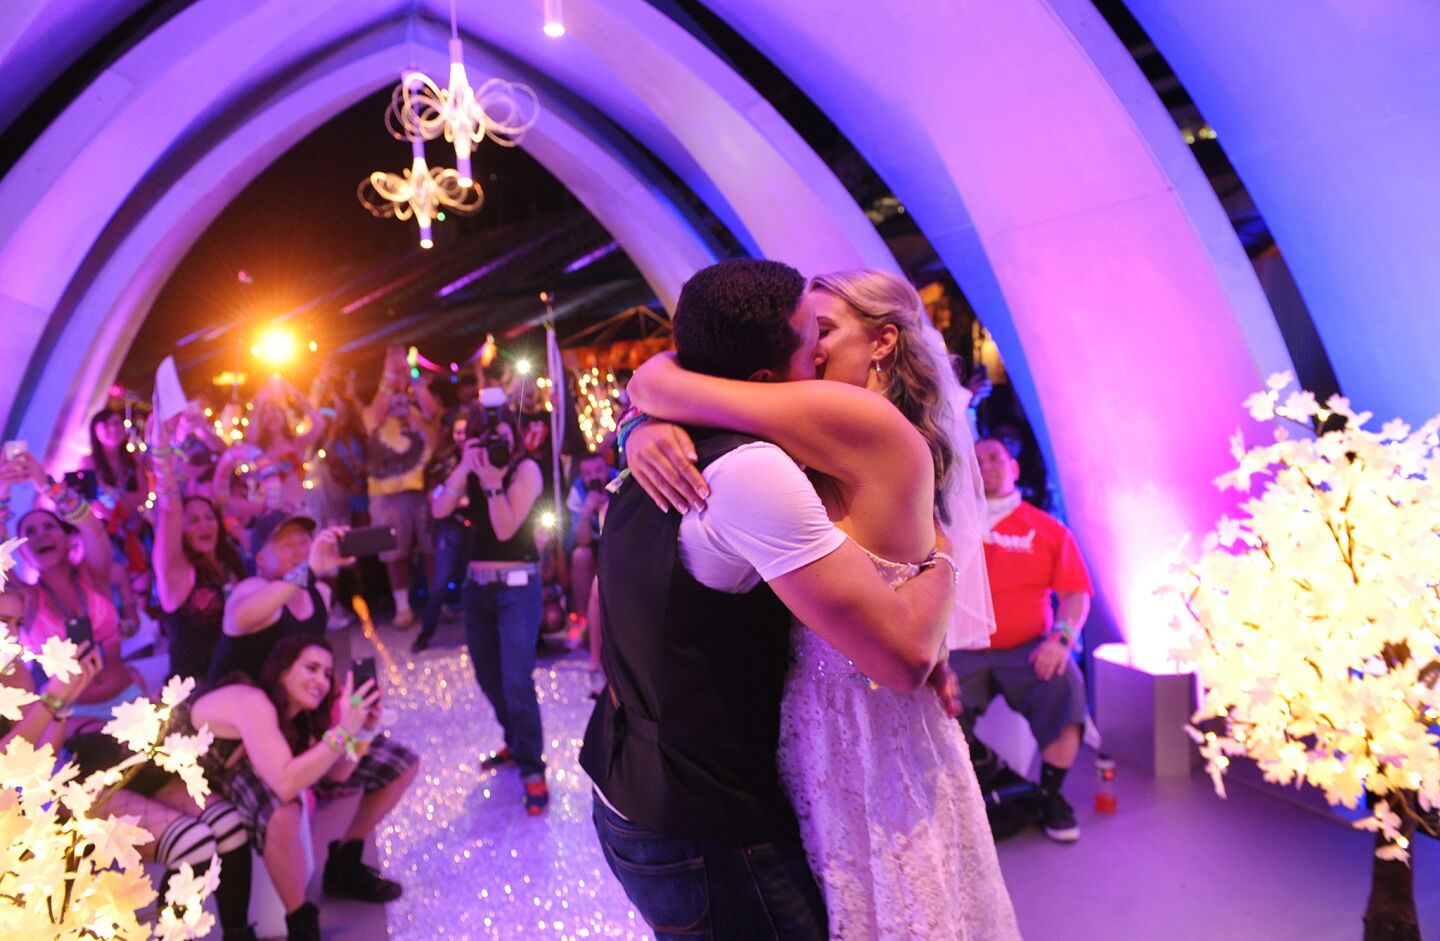 Alexandre and Jessica Montes kiss as they are wed at the chapel of technology during the Electric Daisy Carnival in Las Vegas on June 17.